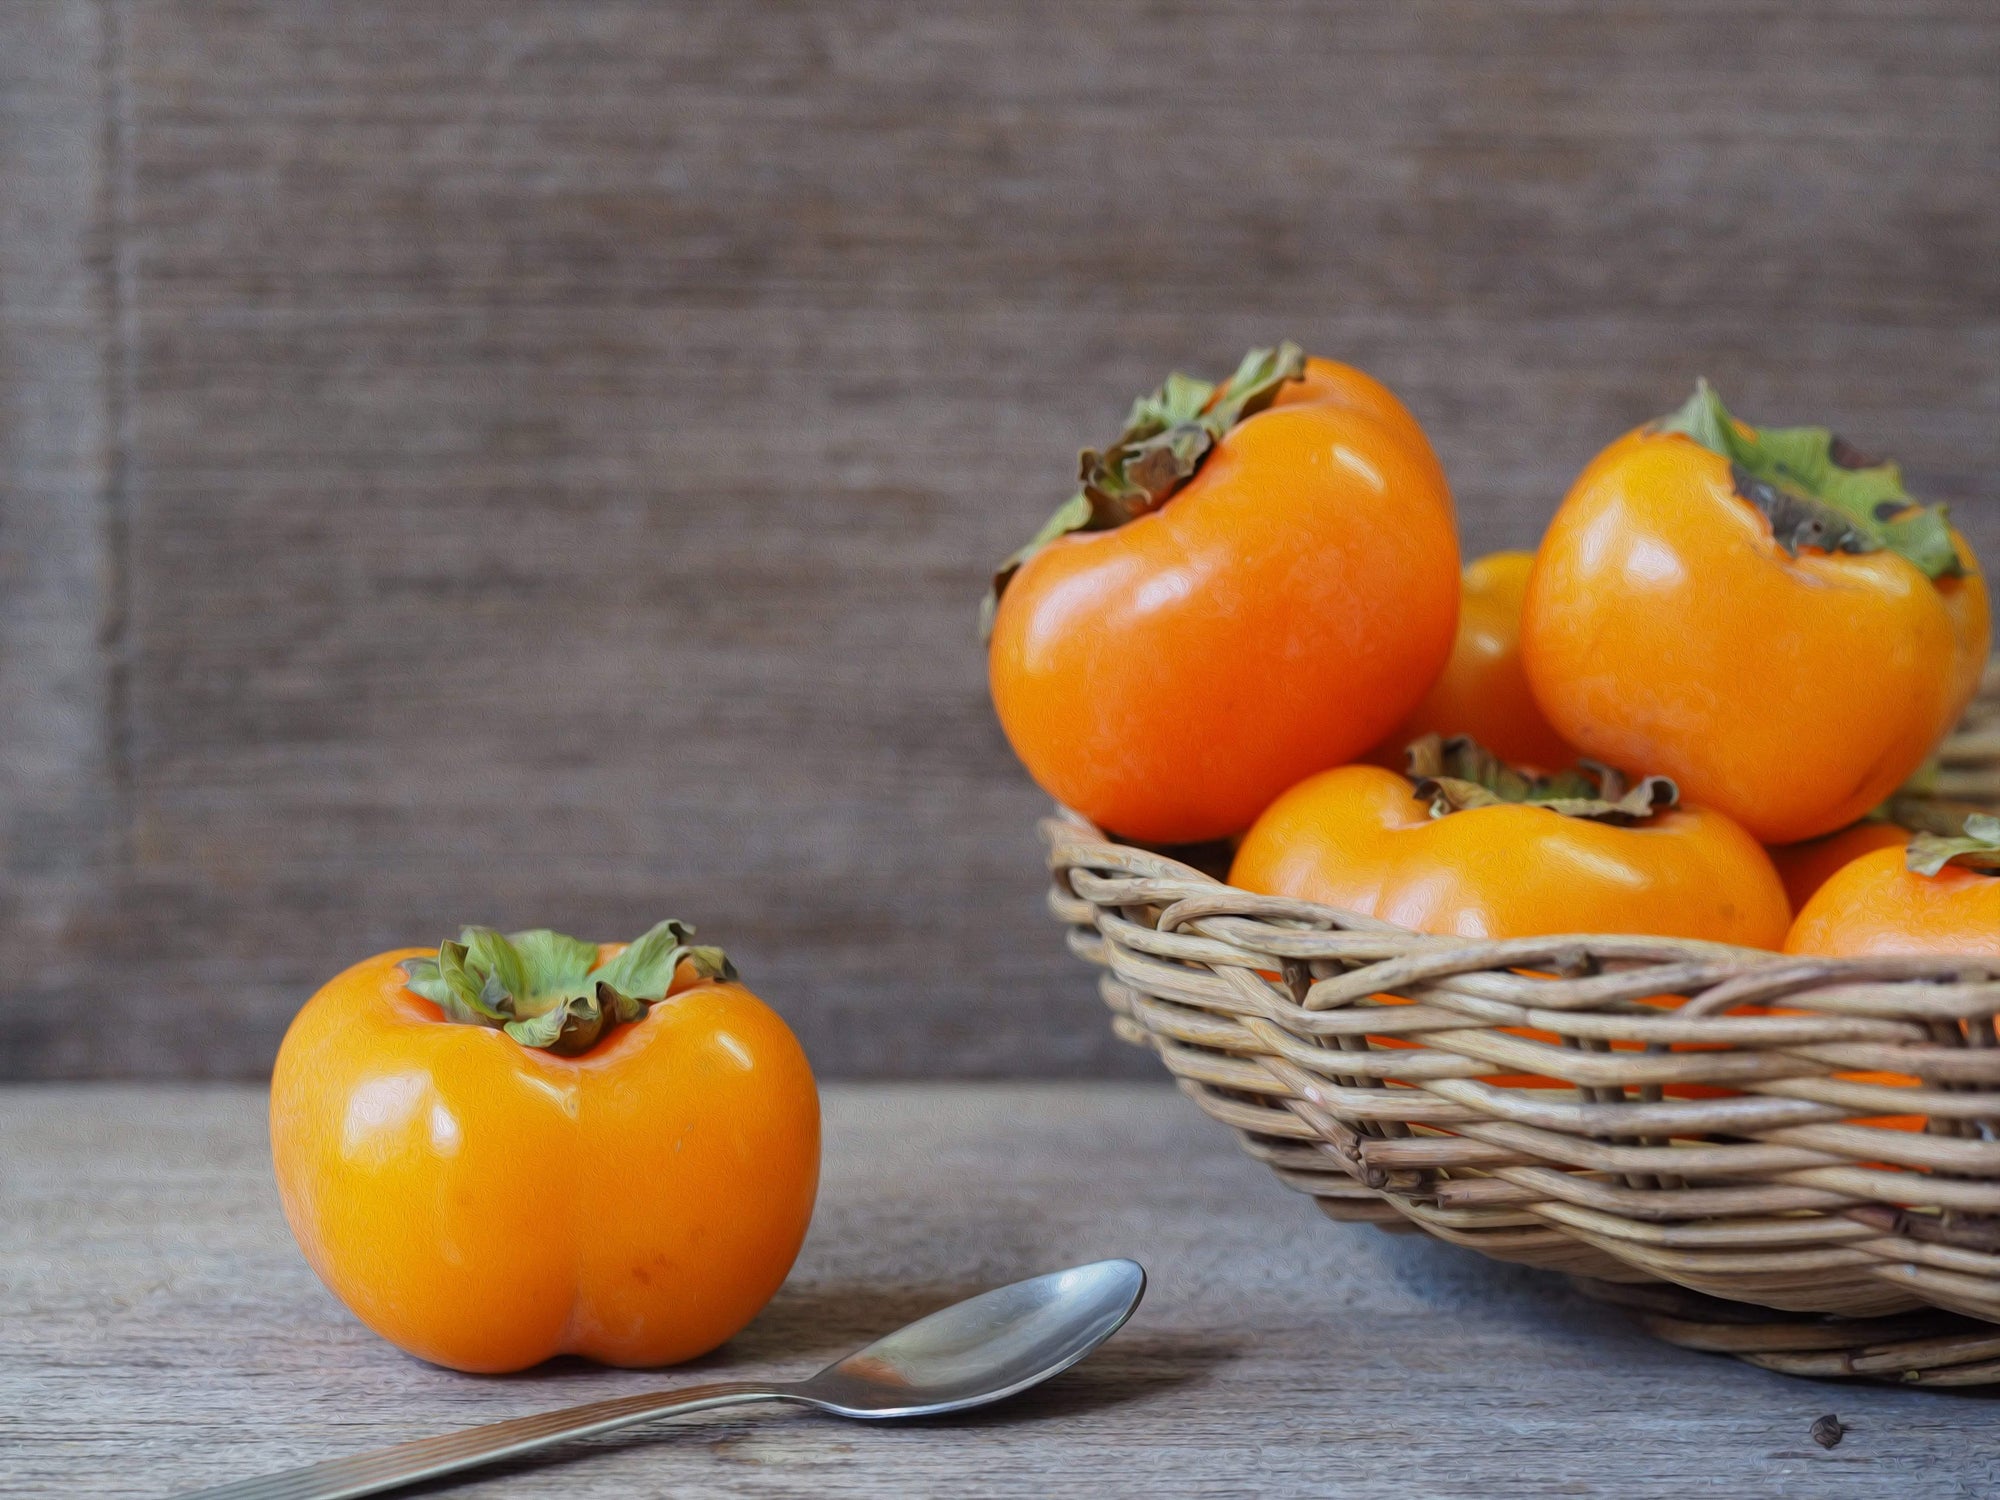 10 Interesting Persimmon Facts for Your Enjoyment